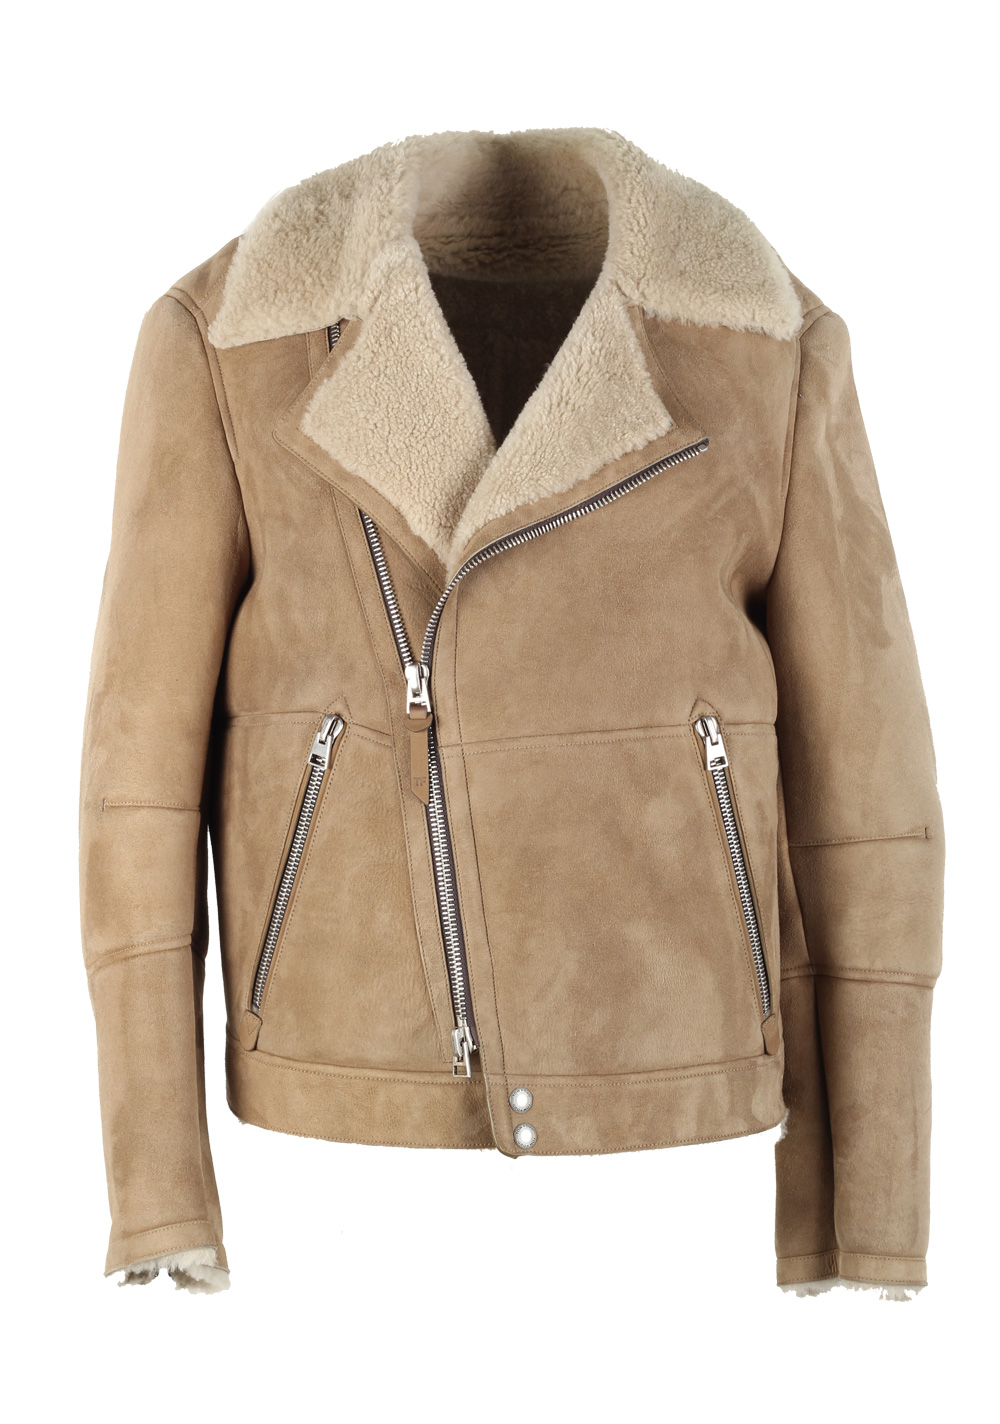 TOM FORD Sand Leather Suede Shearling Jacket Coat Size 52 / 42R U.S. Outerwear | Costume Limité